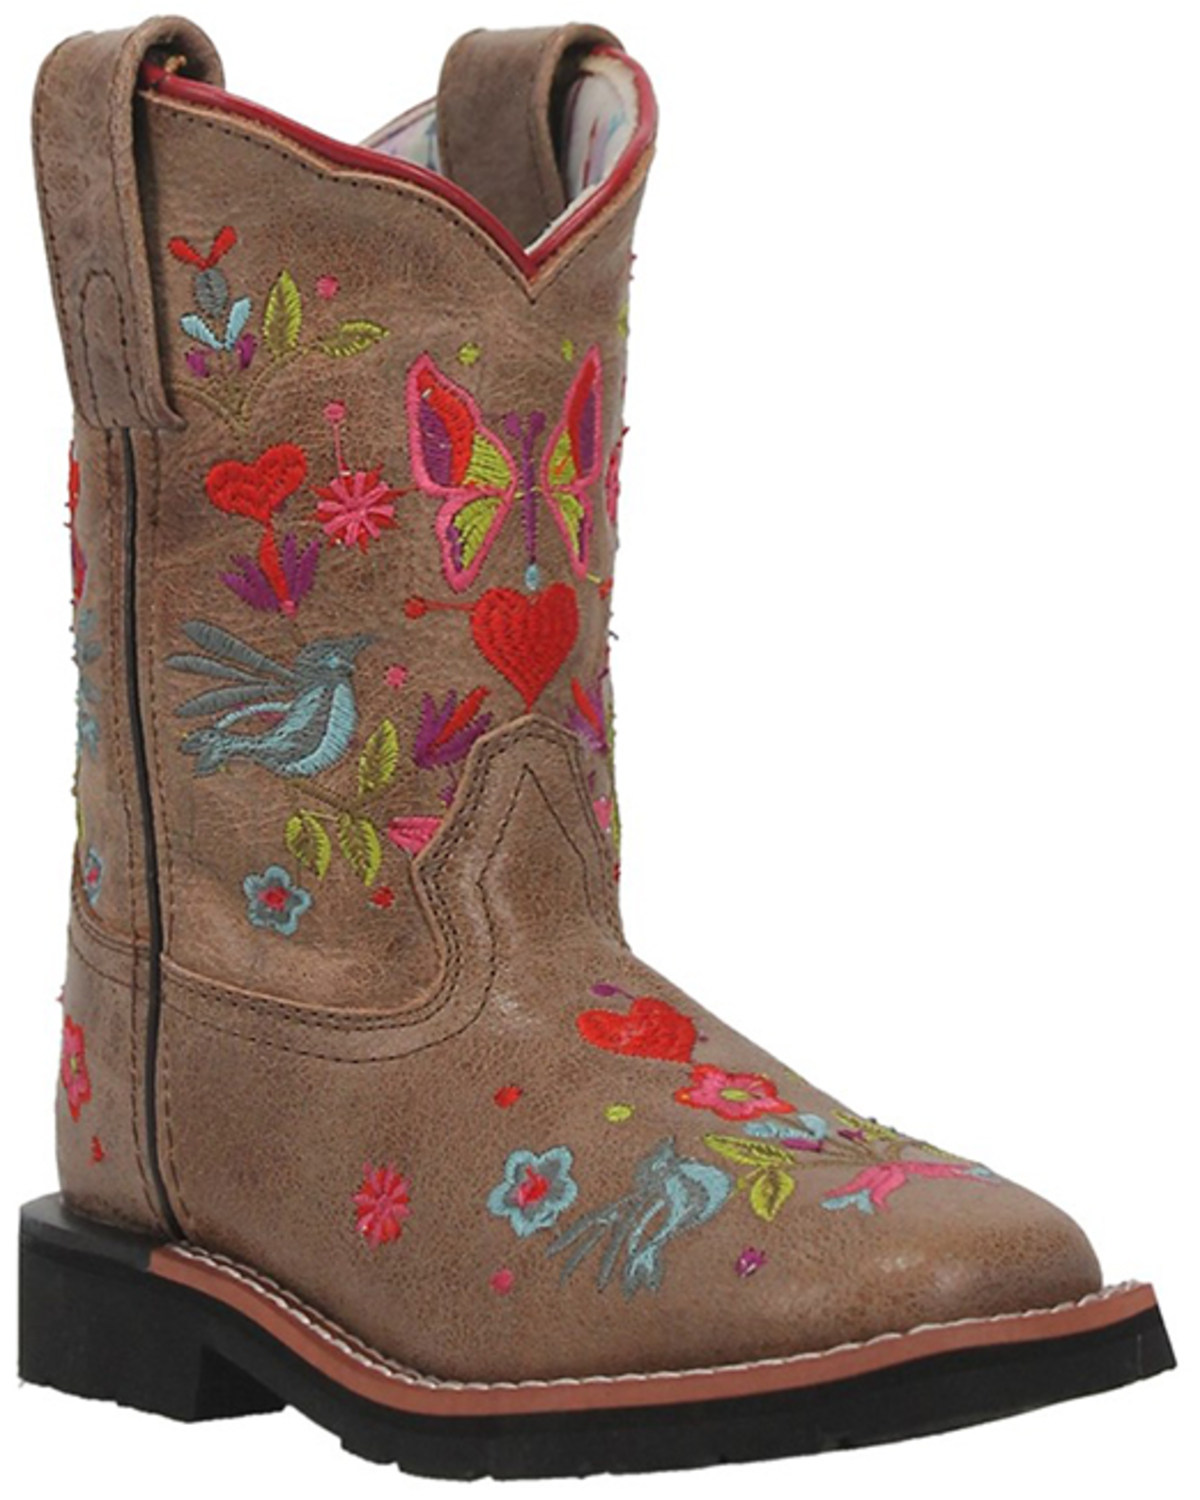 Dan Post Girls' Embroidered Western Boots - Broad Square Toe